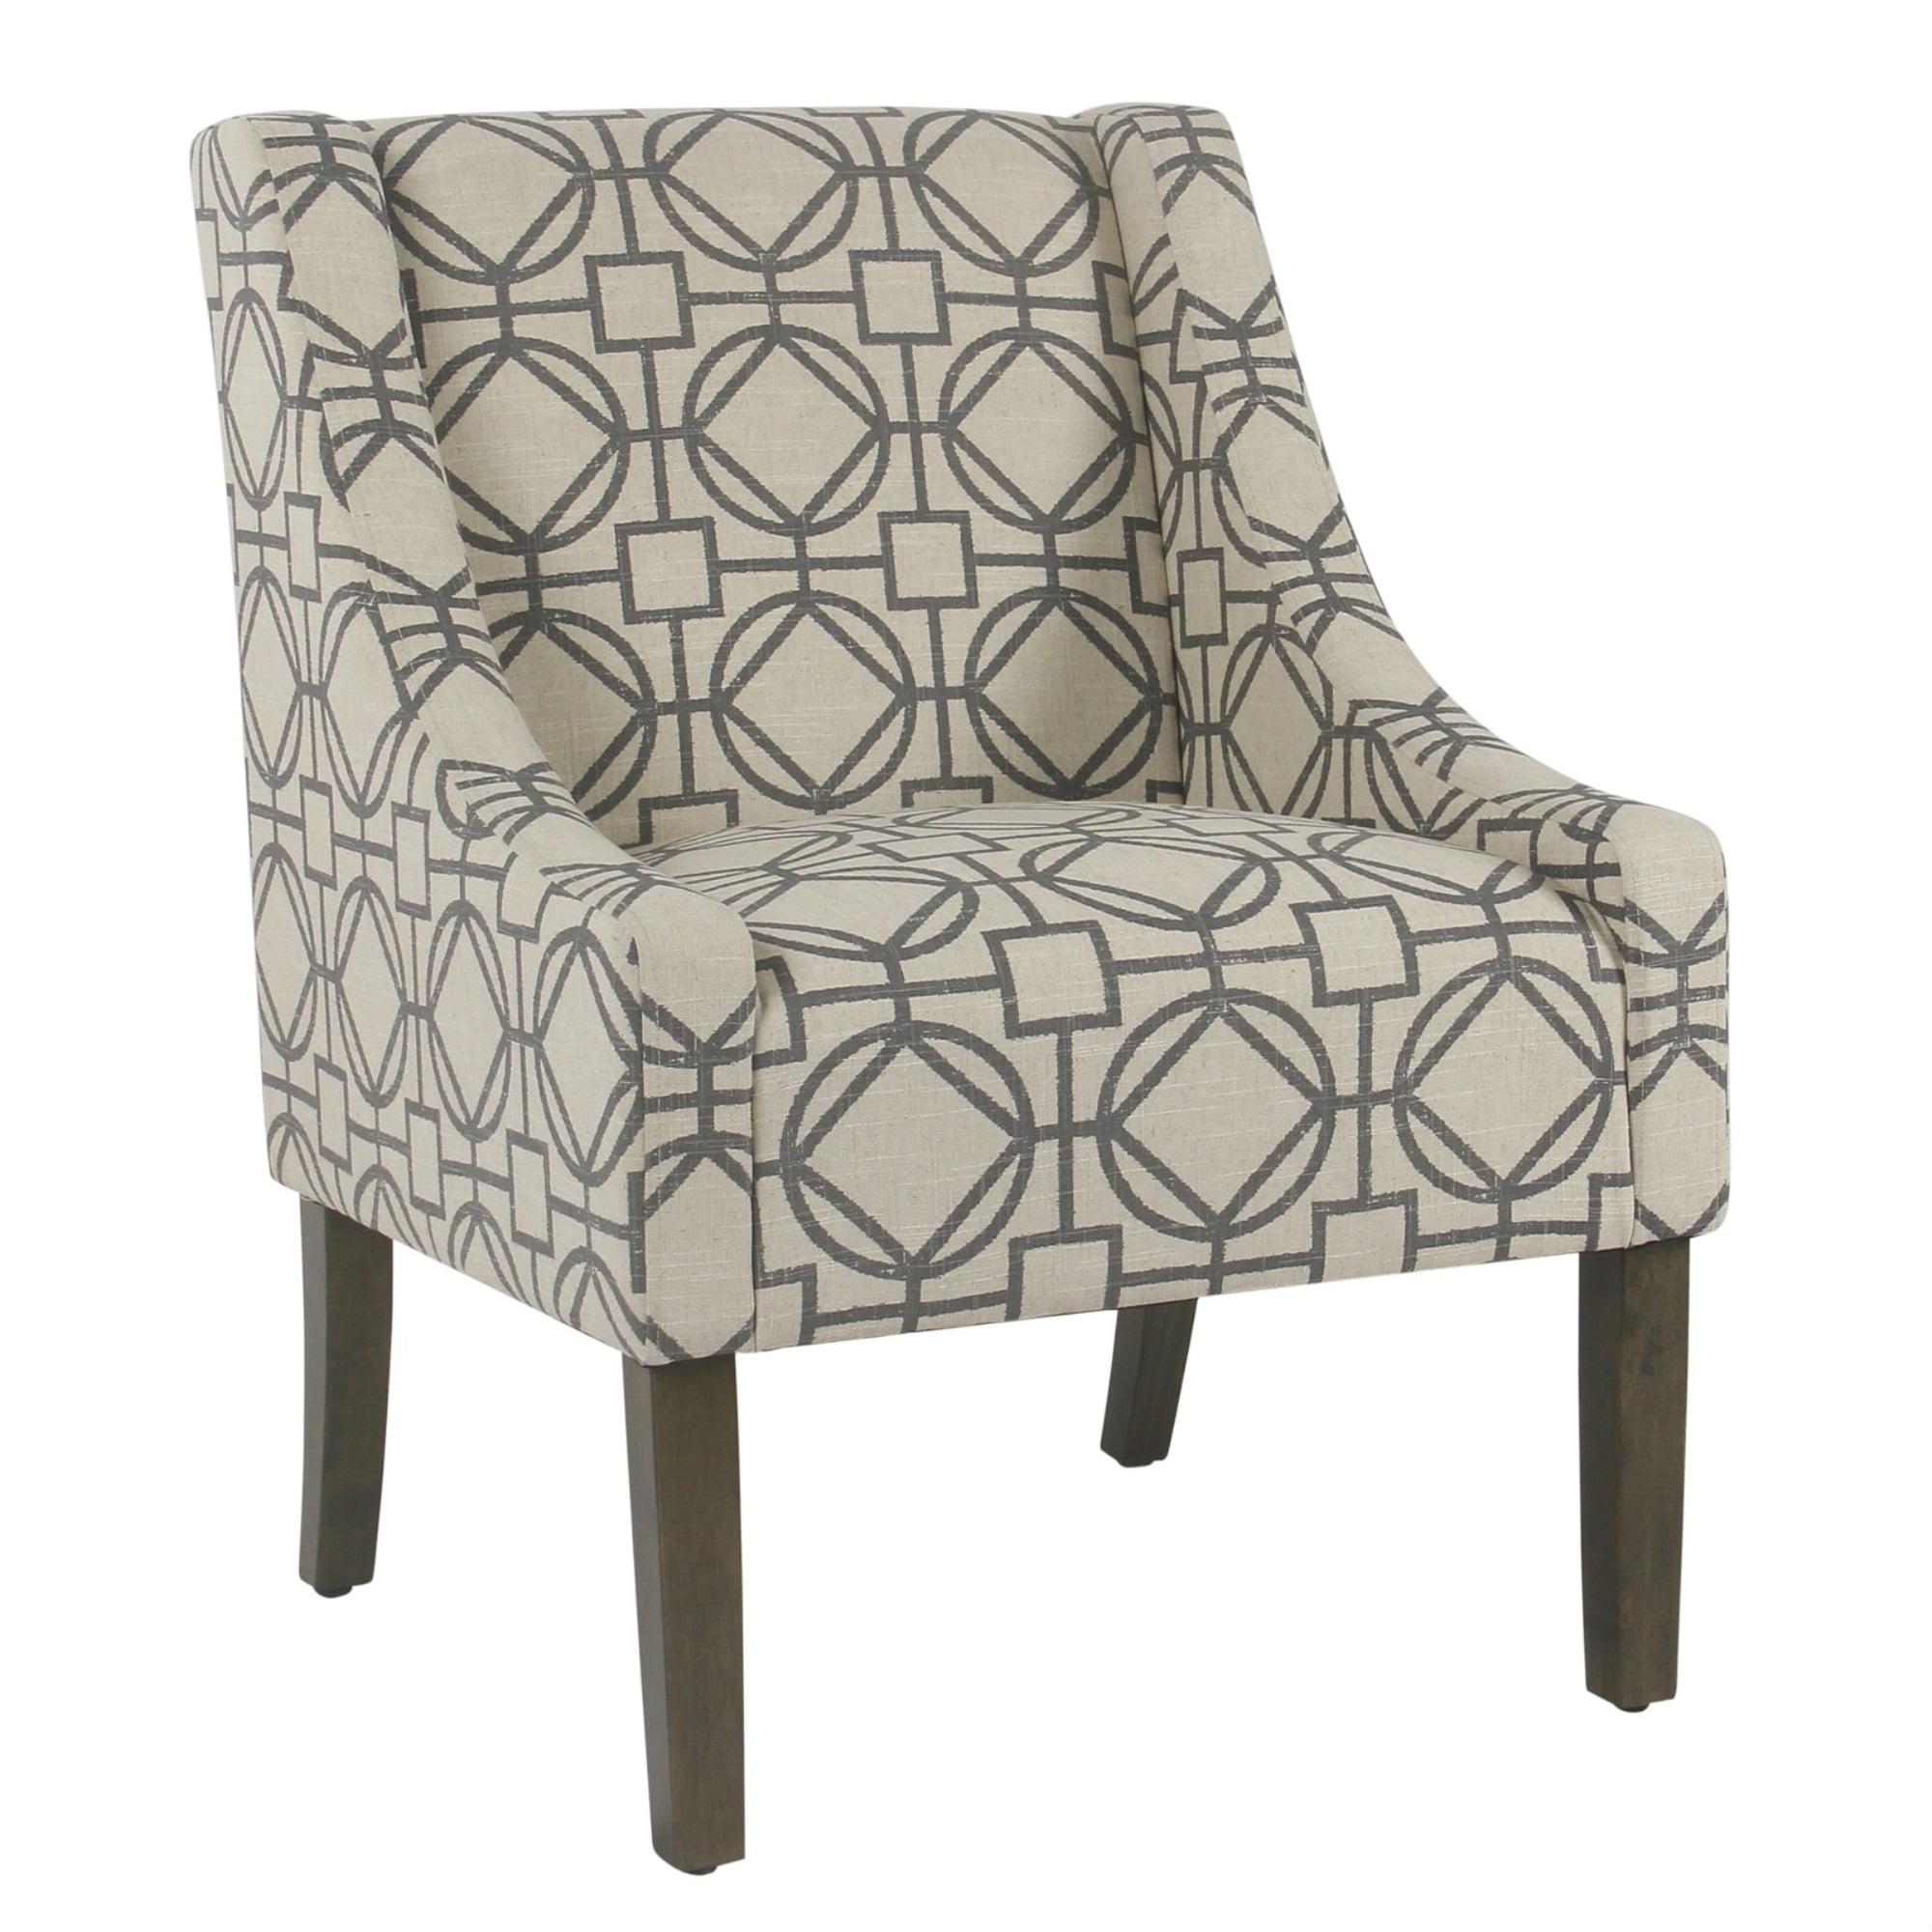 HomeRoots Decor Fabric Upholstered Wooden Accent Chair with Geometric